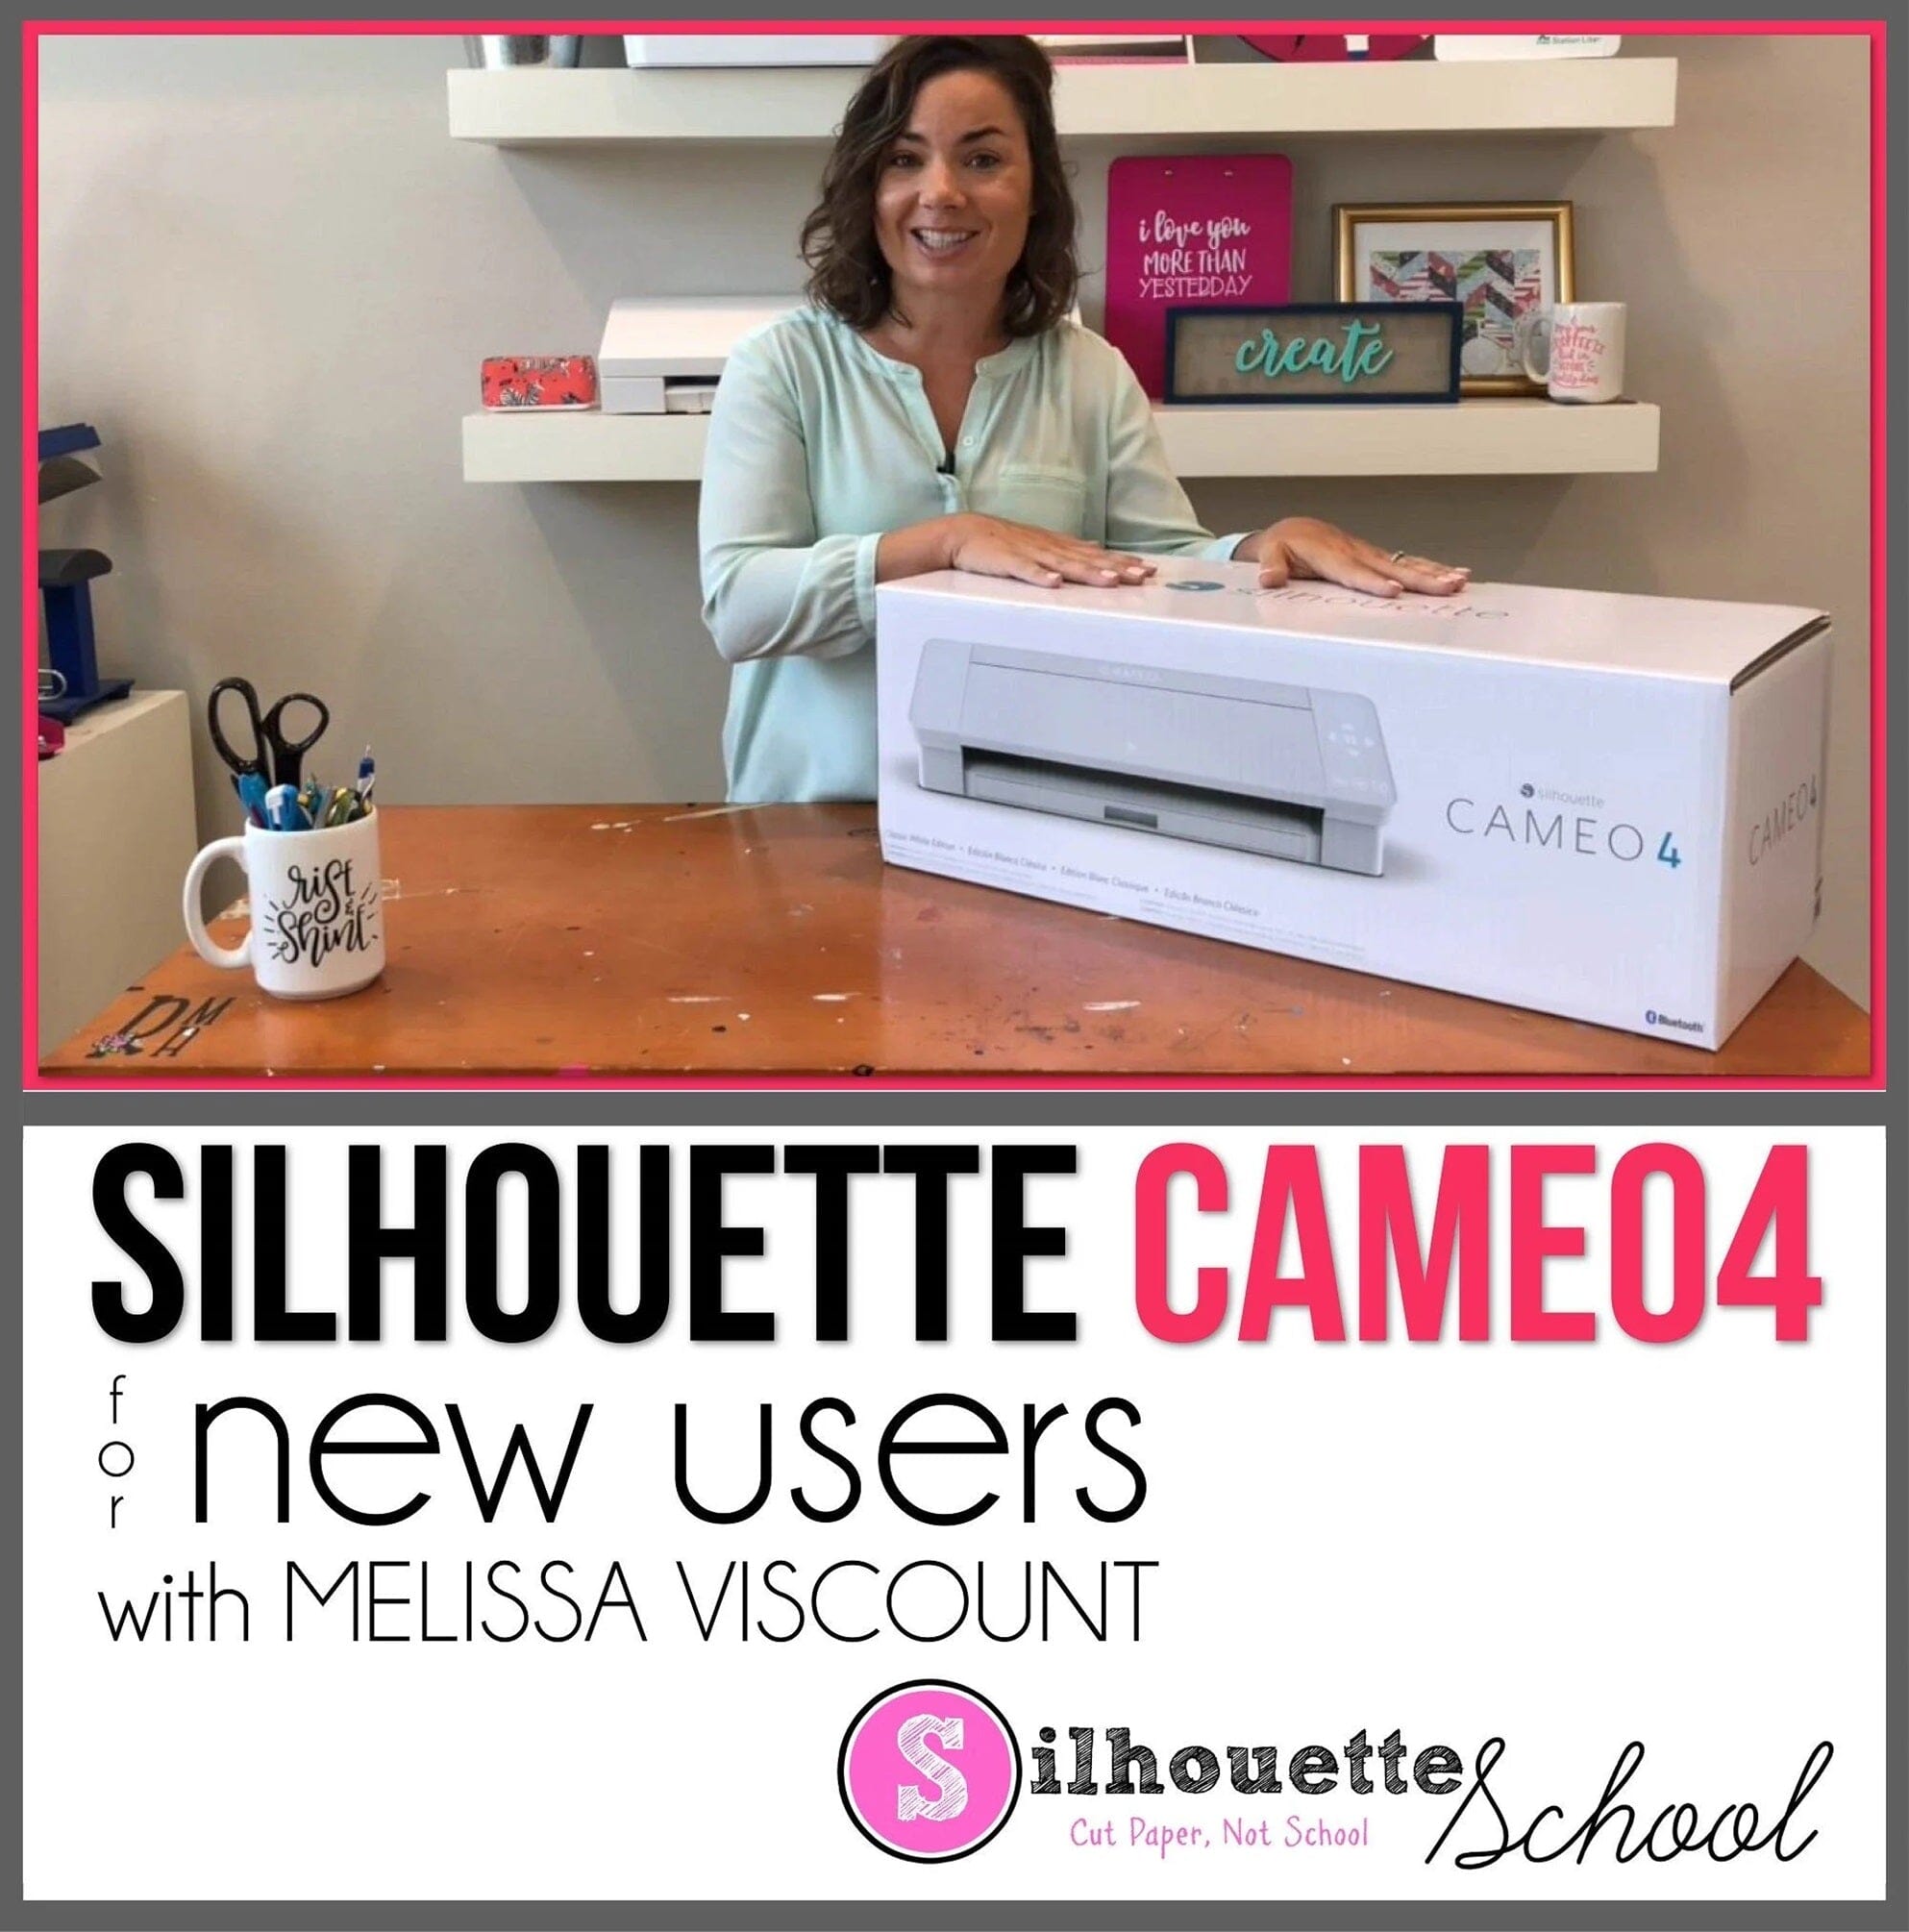 Silhouette Cameo 4 Online Beginner Class by Silhouette School